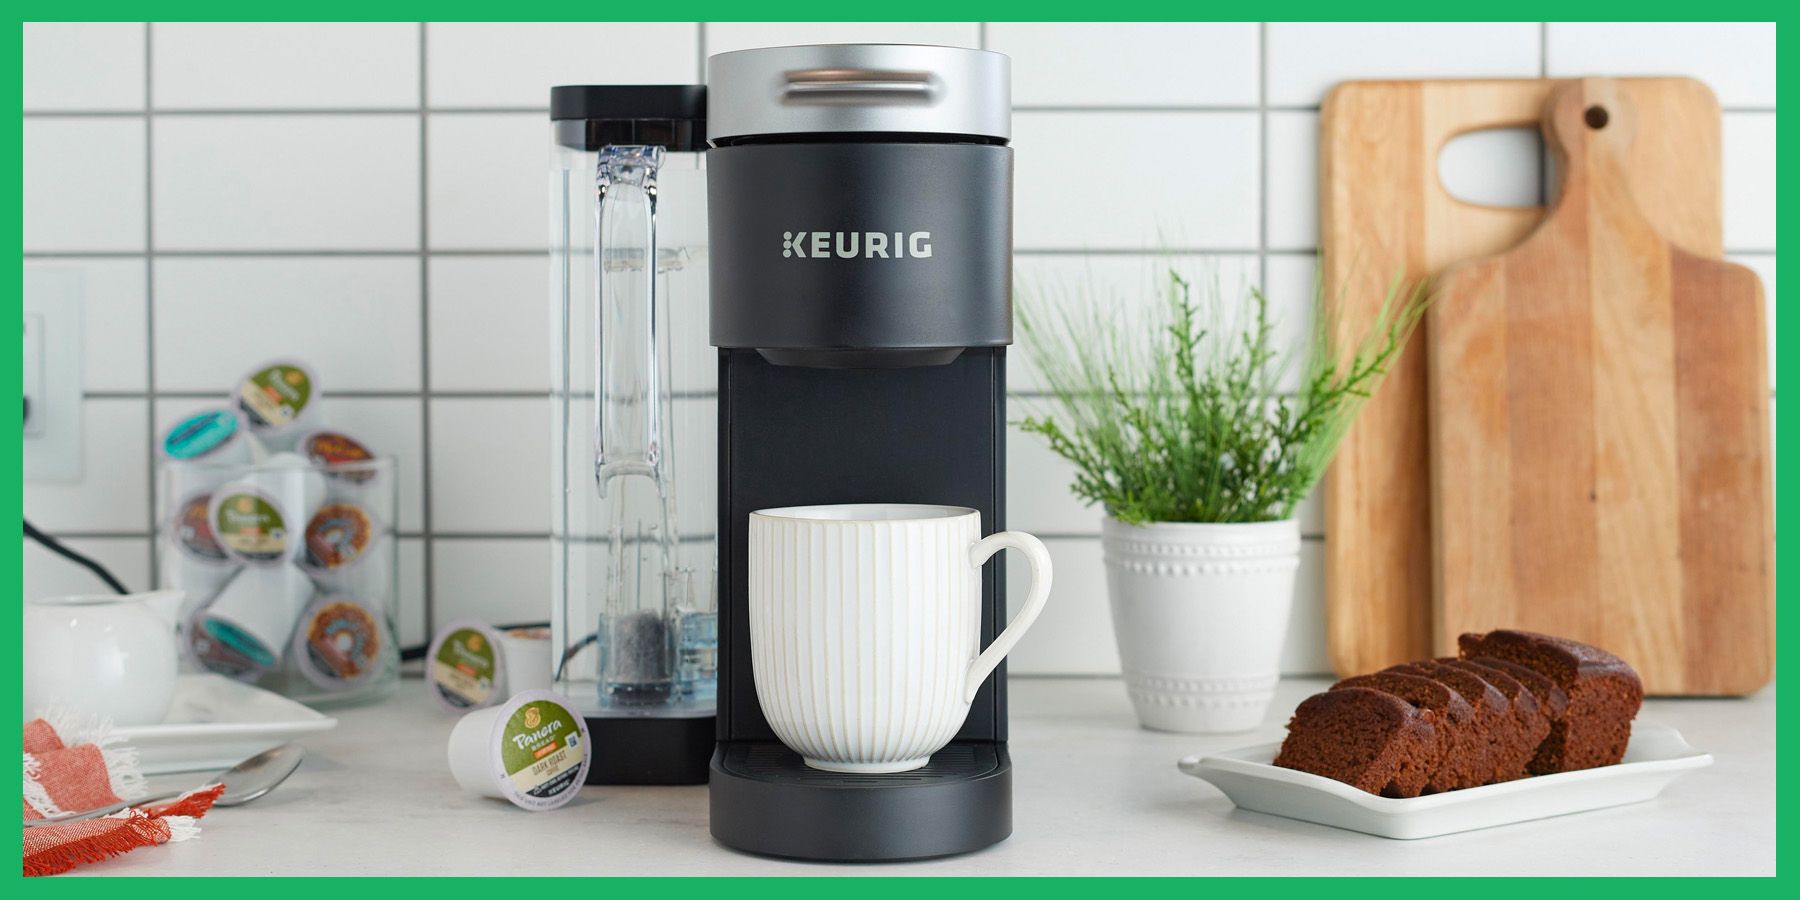 How Long Can You Use Your Keurig Before It Starts Growing Mold?